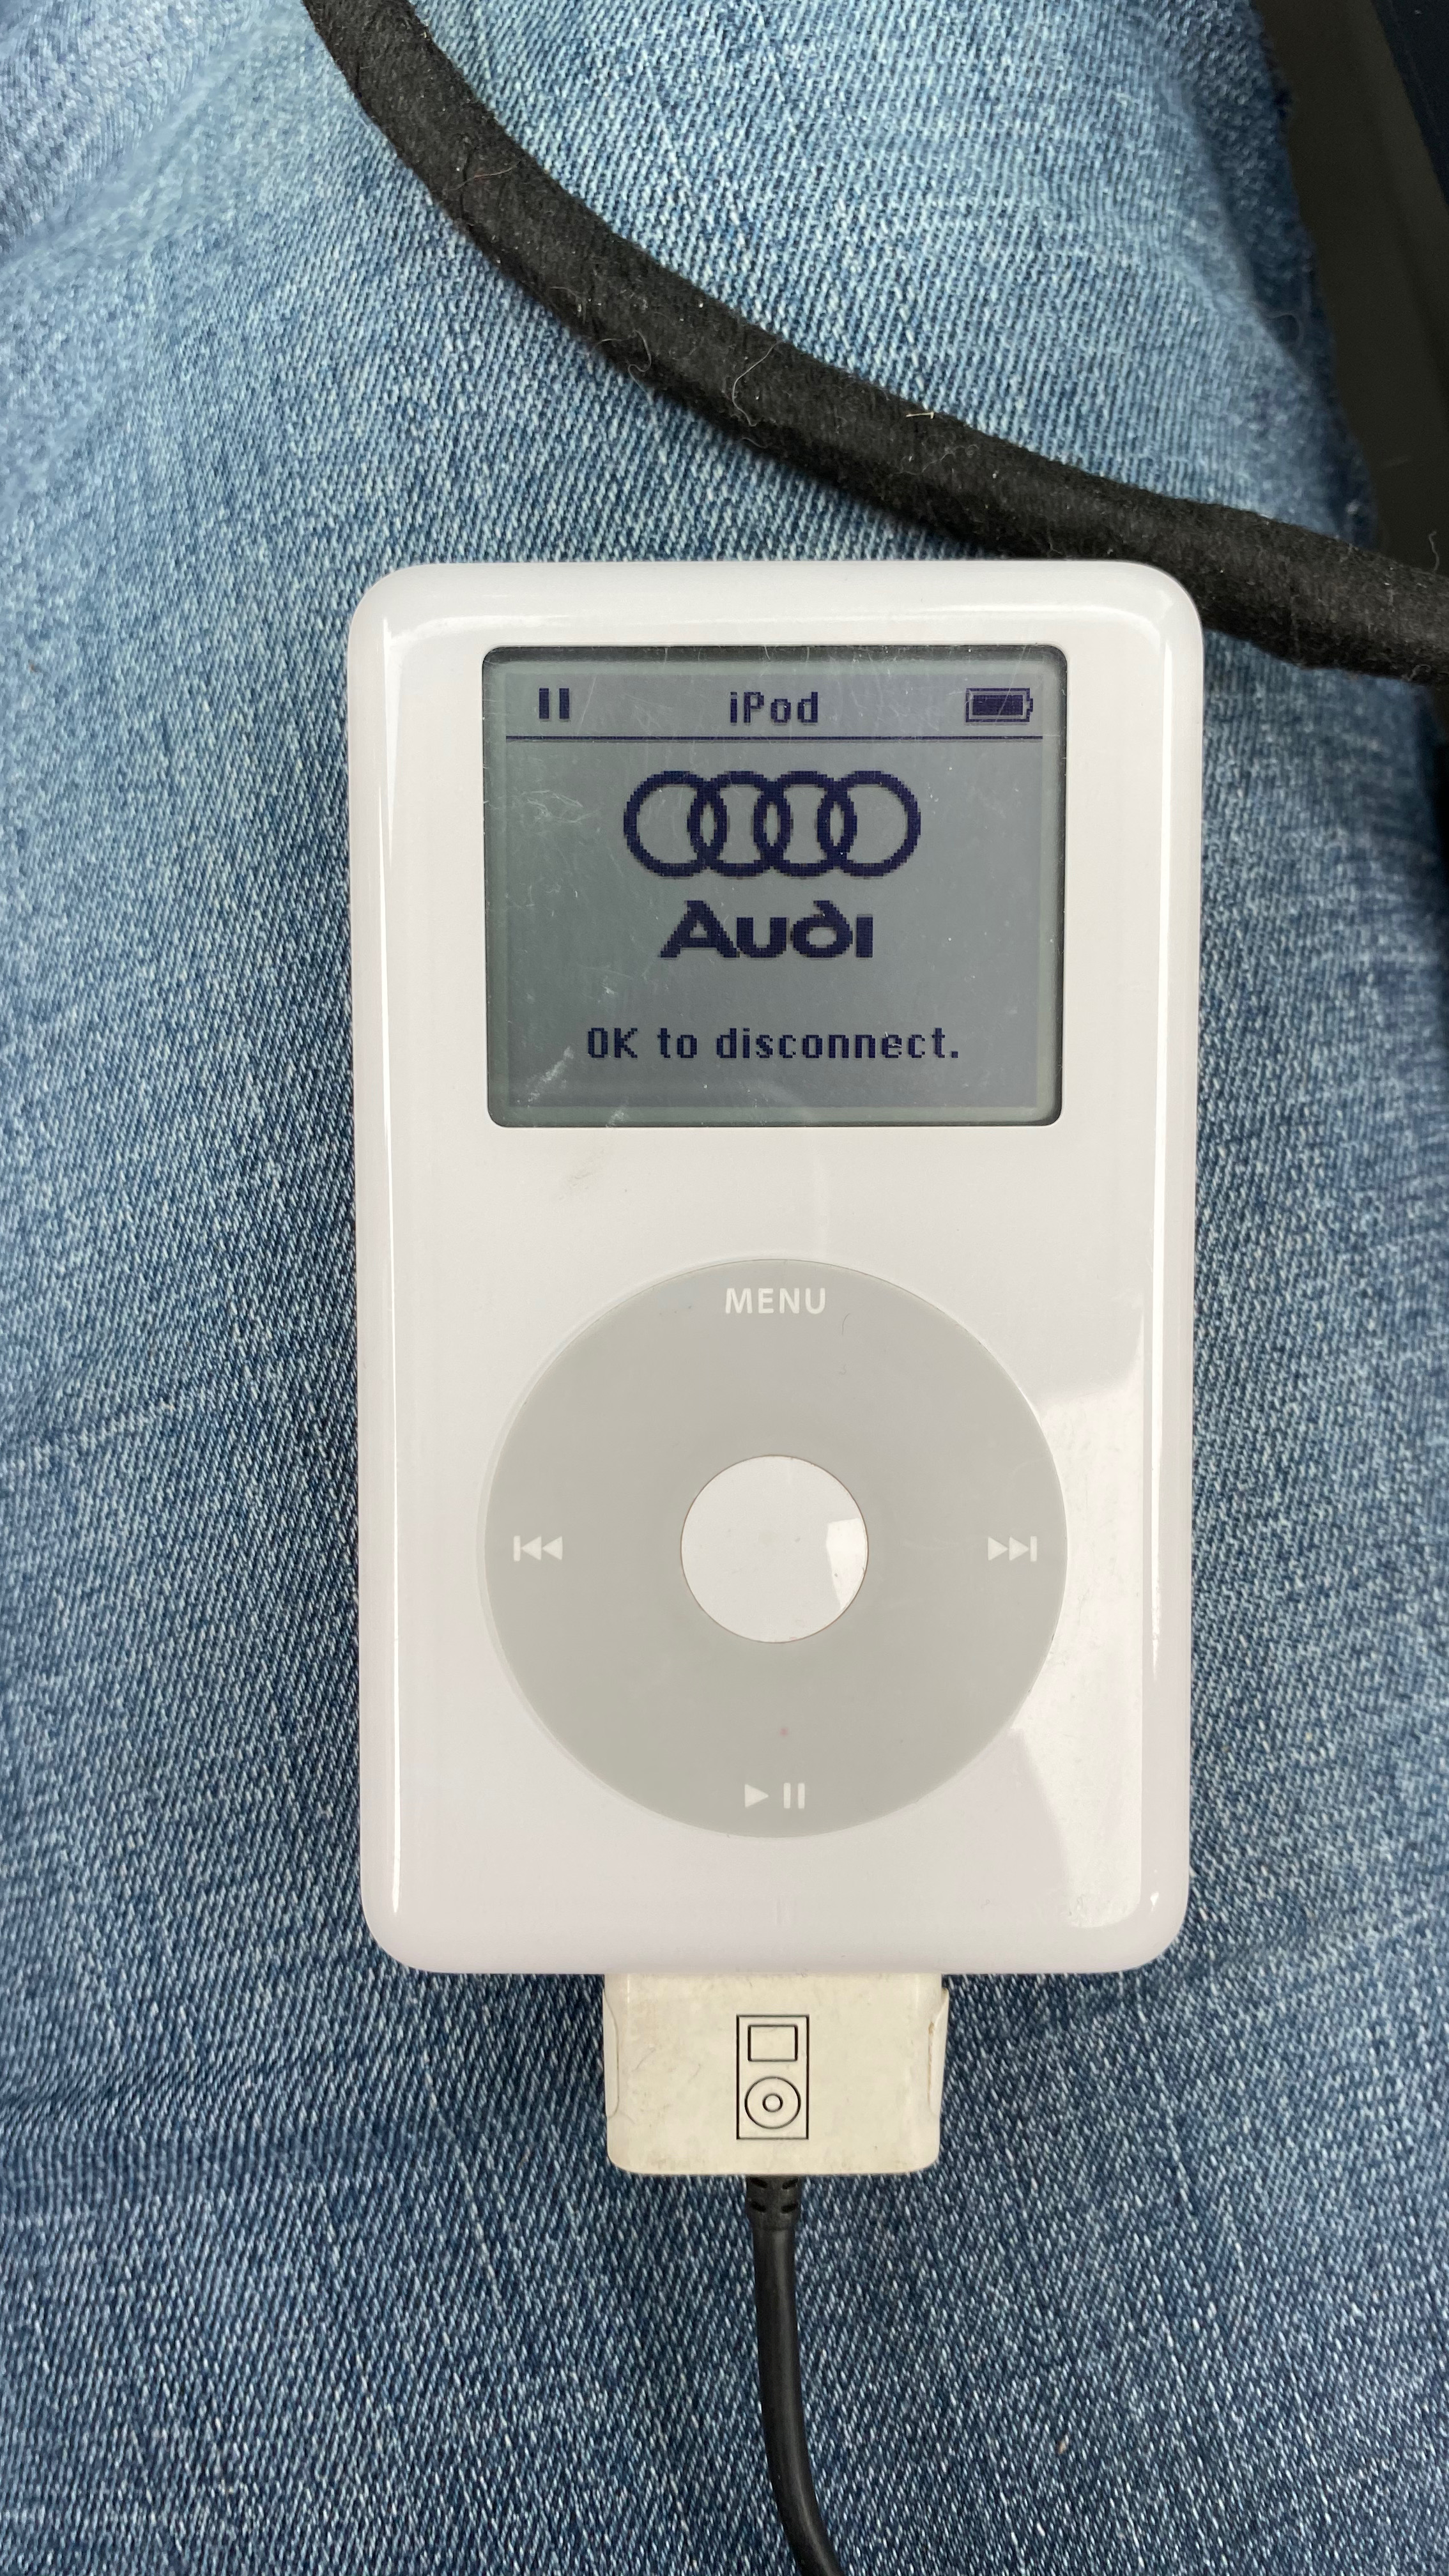 iPod adapter and vintage iPod